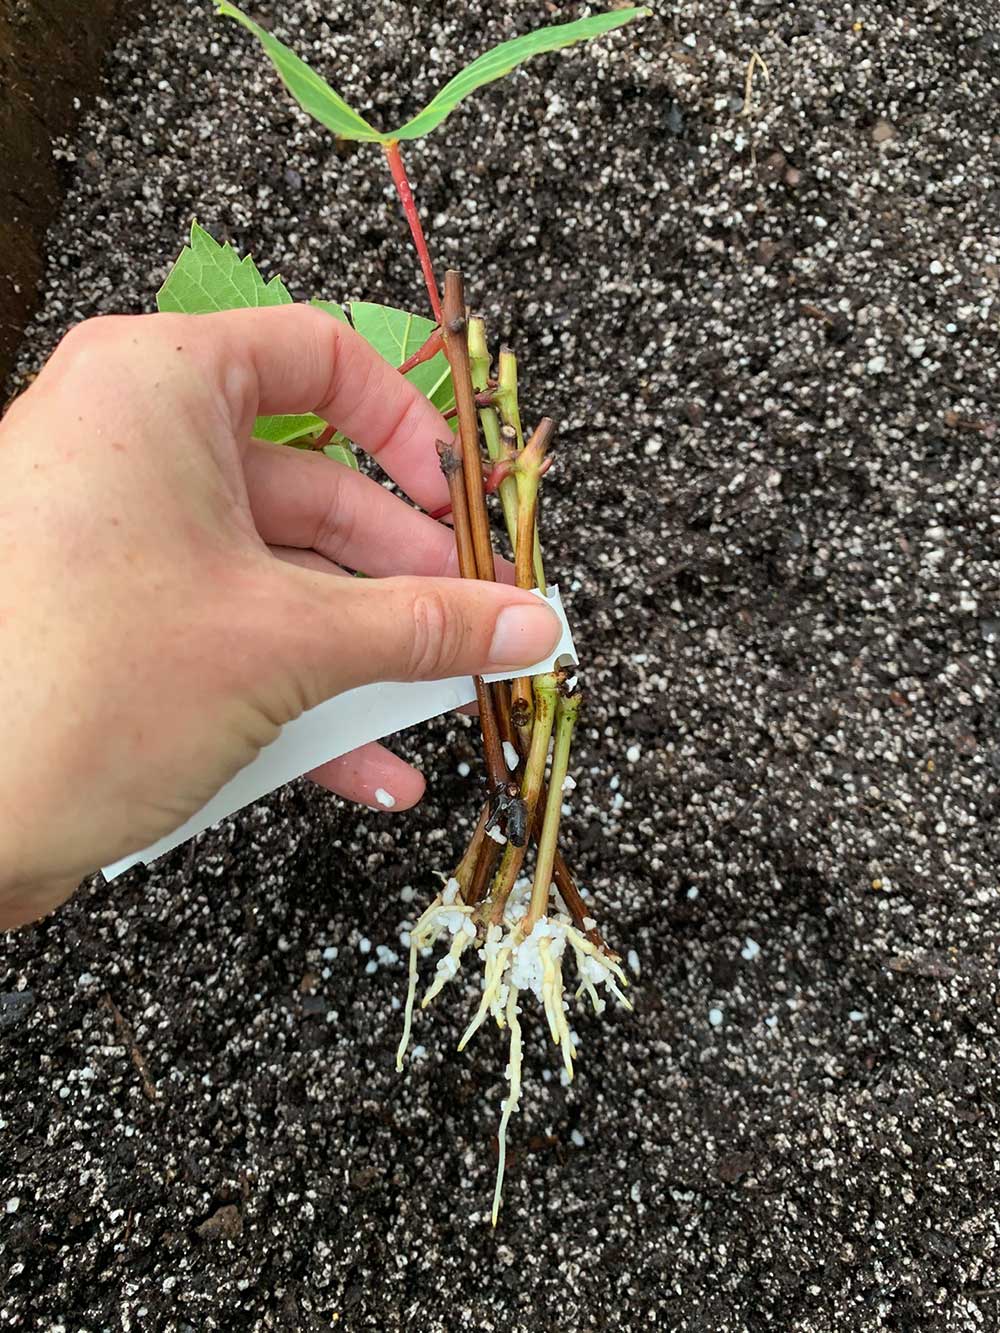 Semi-hardwood grapevine cuttings taken in the summer and rooted in perlite growing media.